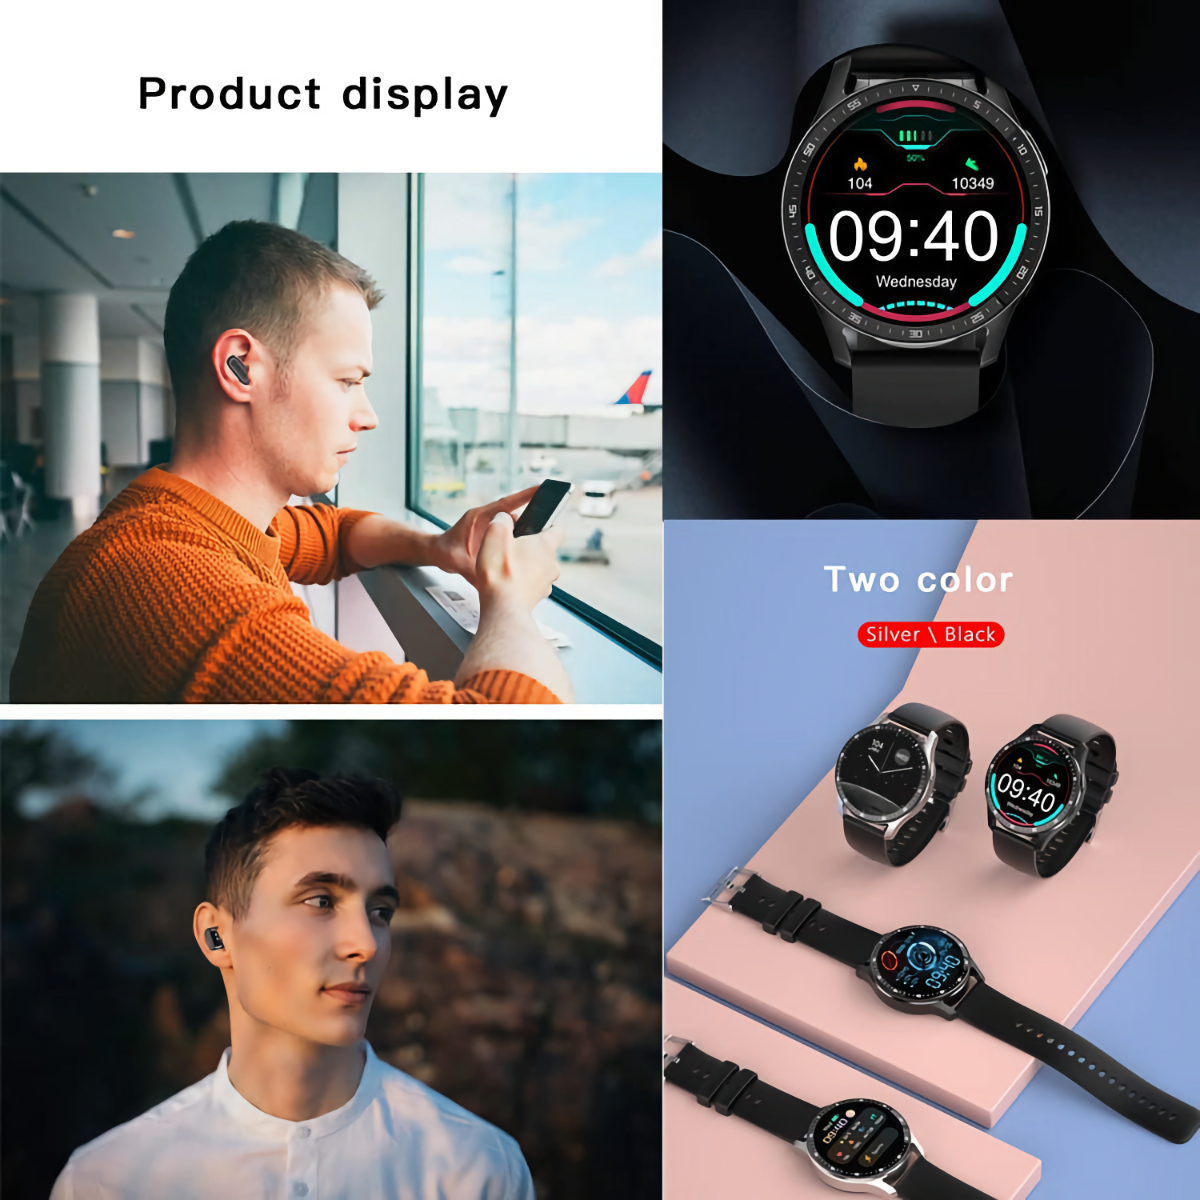 Smartwatch with Wireless Earbuds - Health Tracking, Sports Mode & More for Men & Women